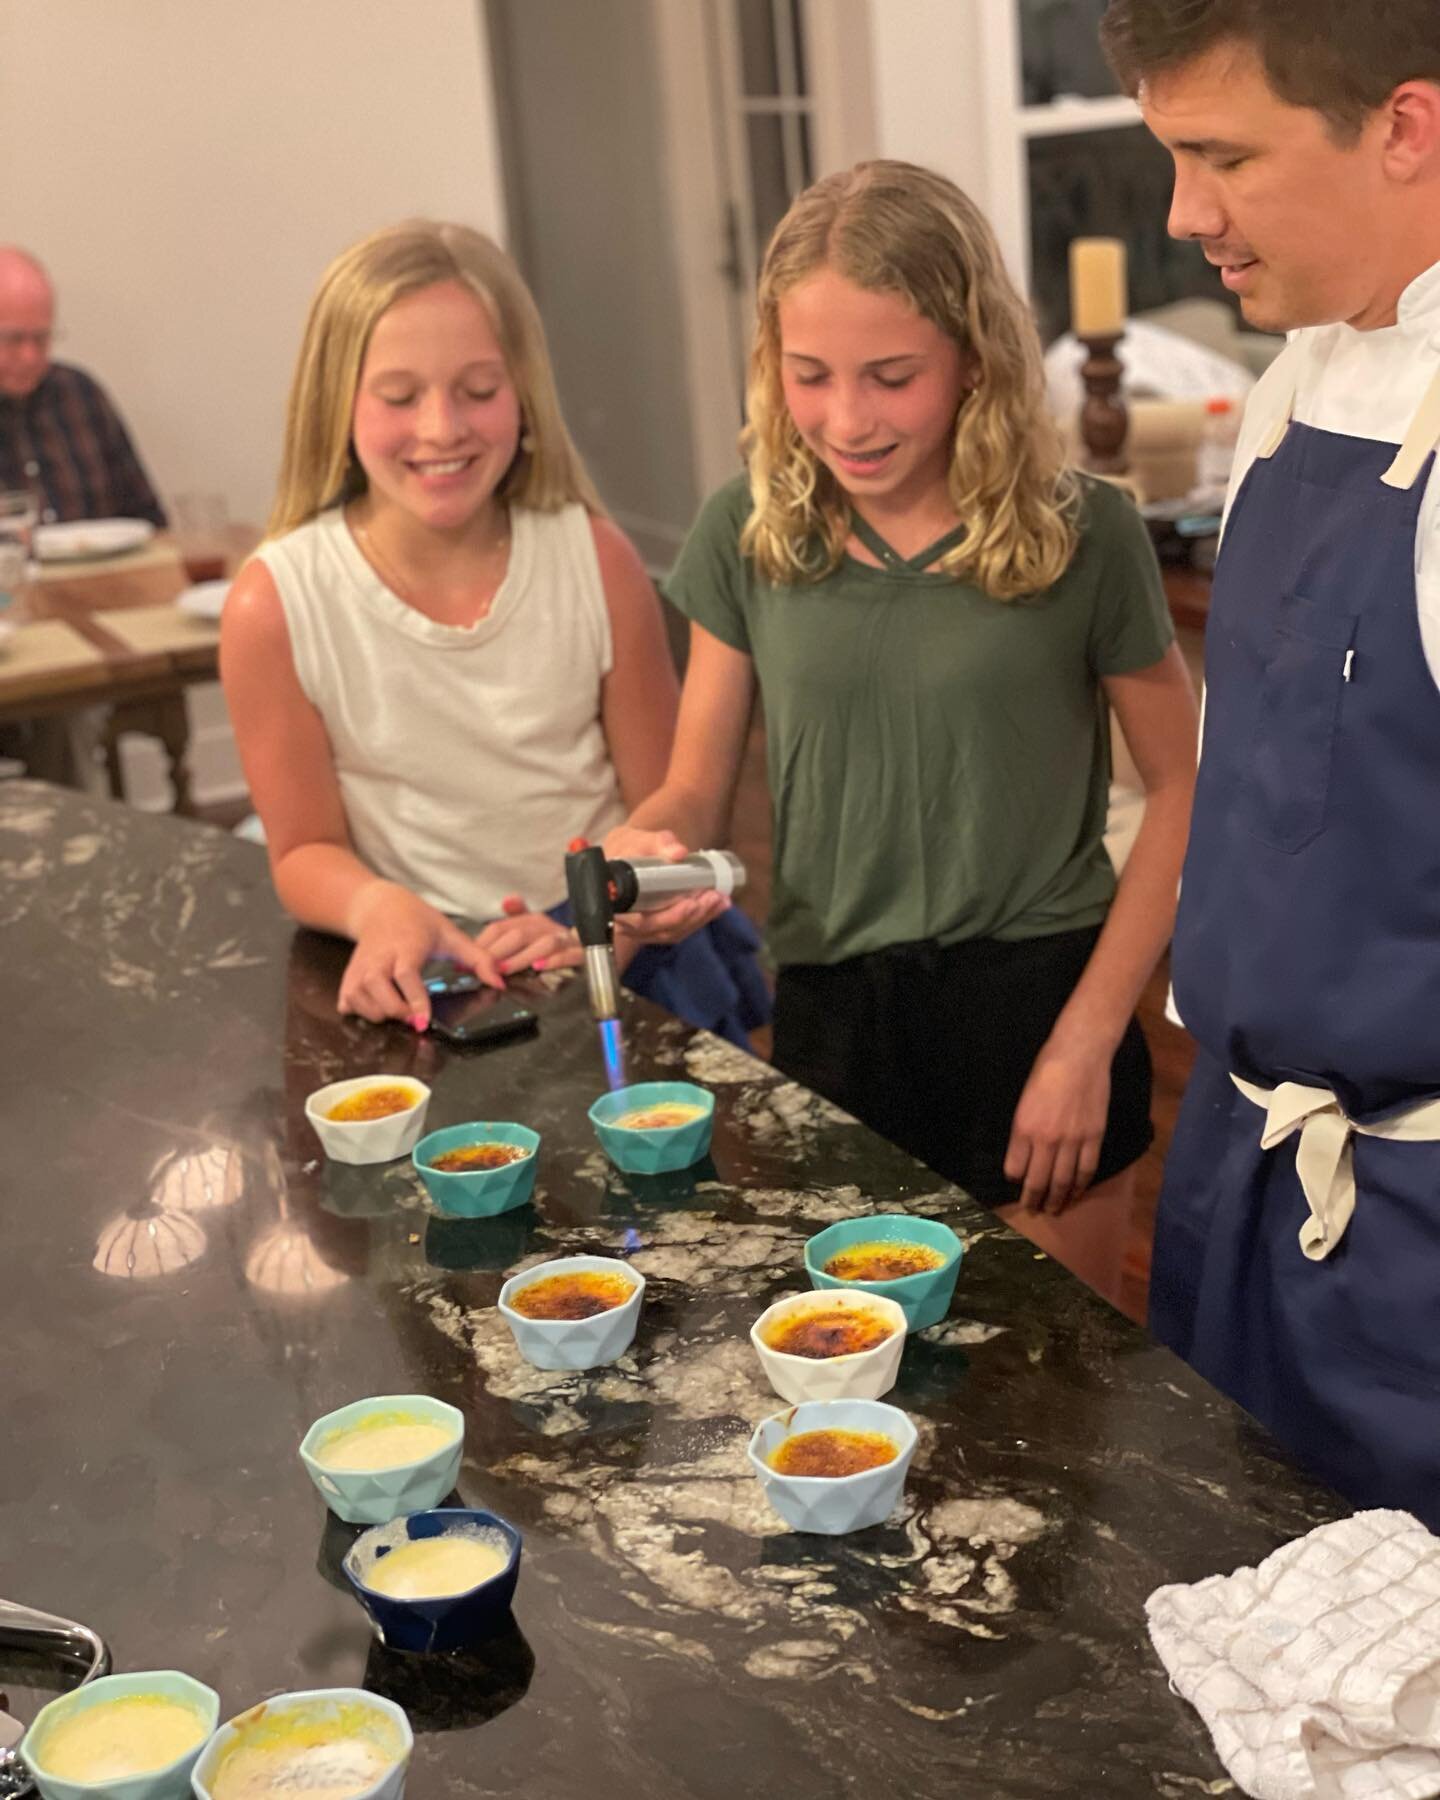 Chef Nathan loved teaching these young chefs how the br&ucirc;l&eacute;e! Not only is chef Nathan's food amazing, but he's personable, fun, and loves creating culinary experiences you'll never forget! 😎